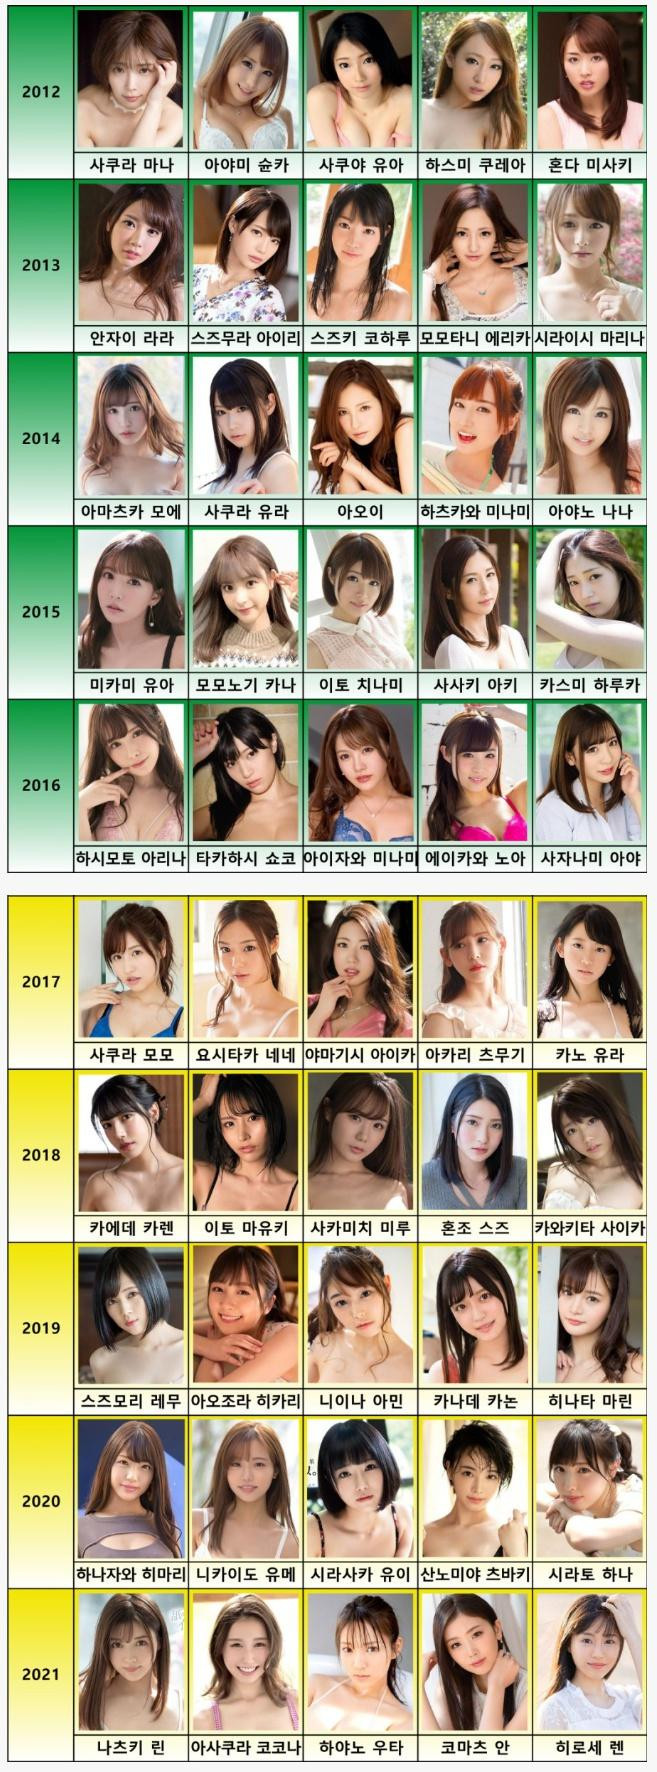 Legendary AV actor lineup by year that there is no batting line